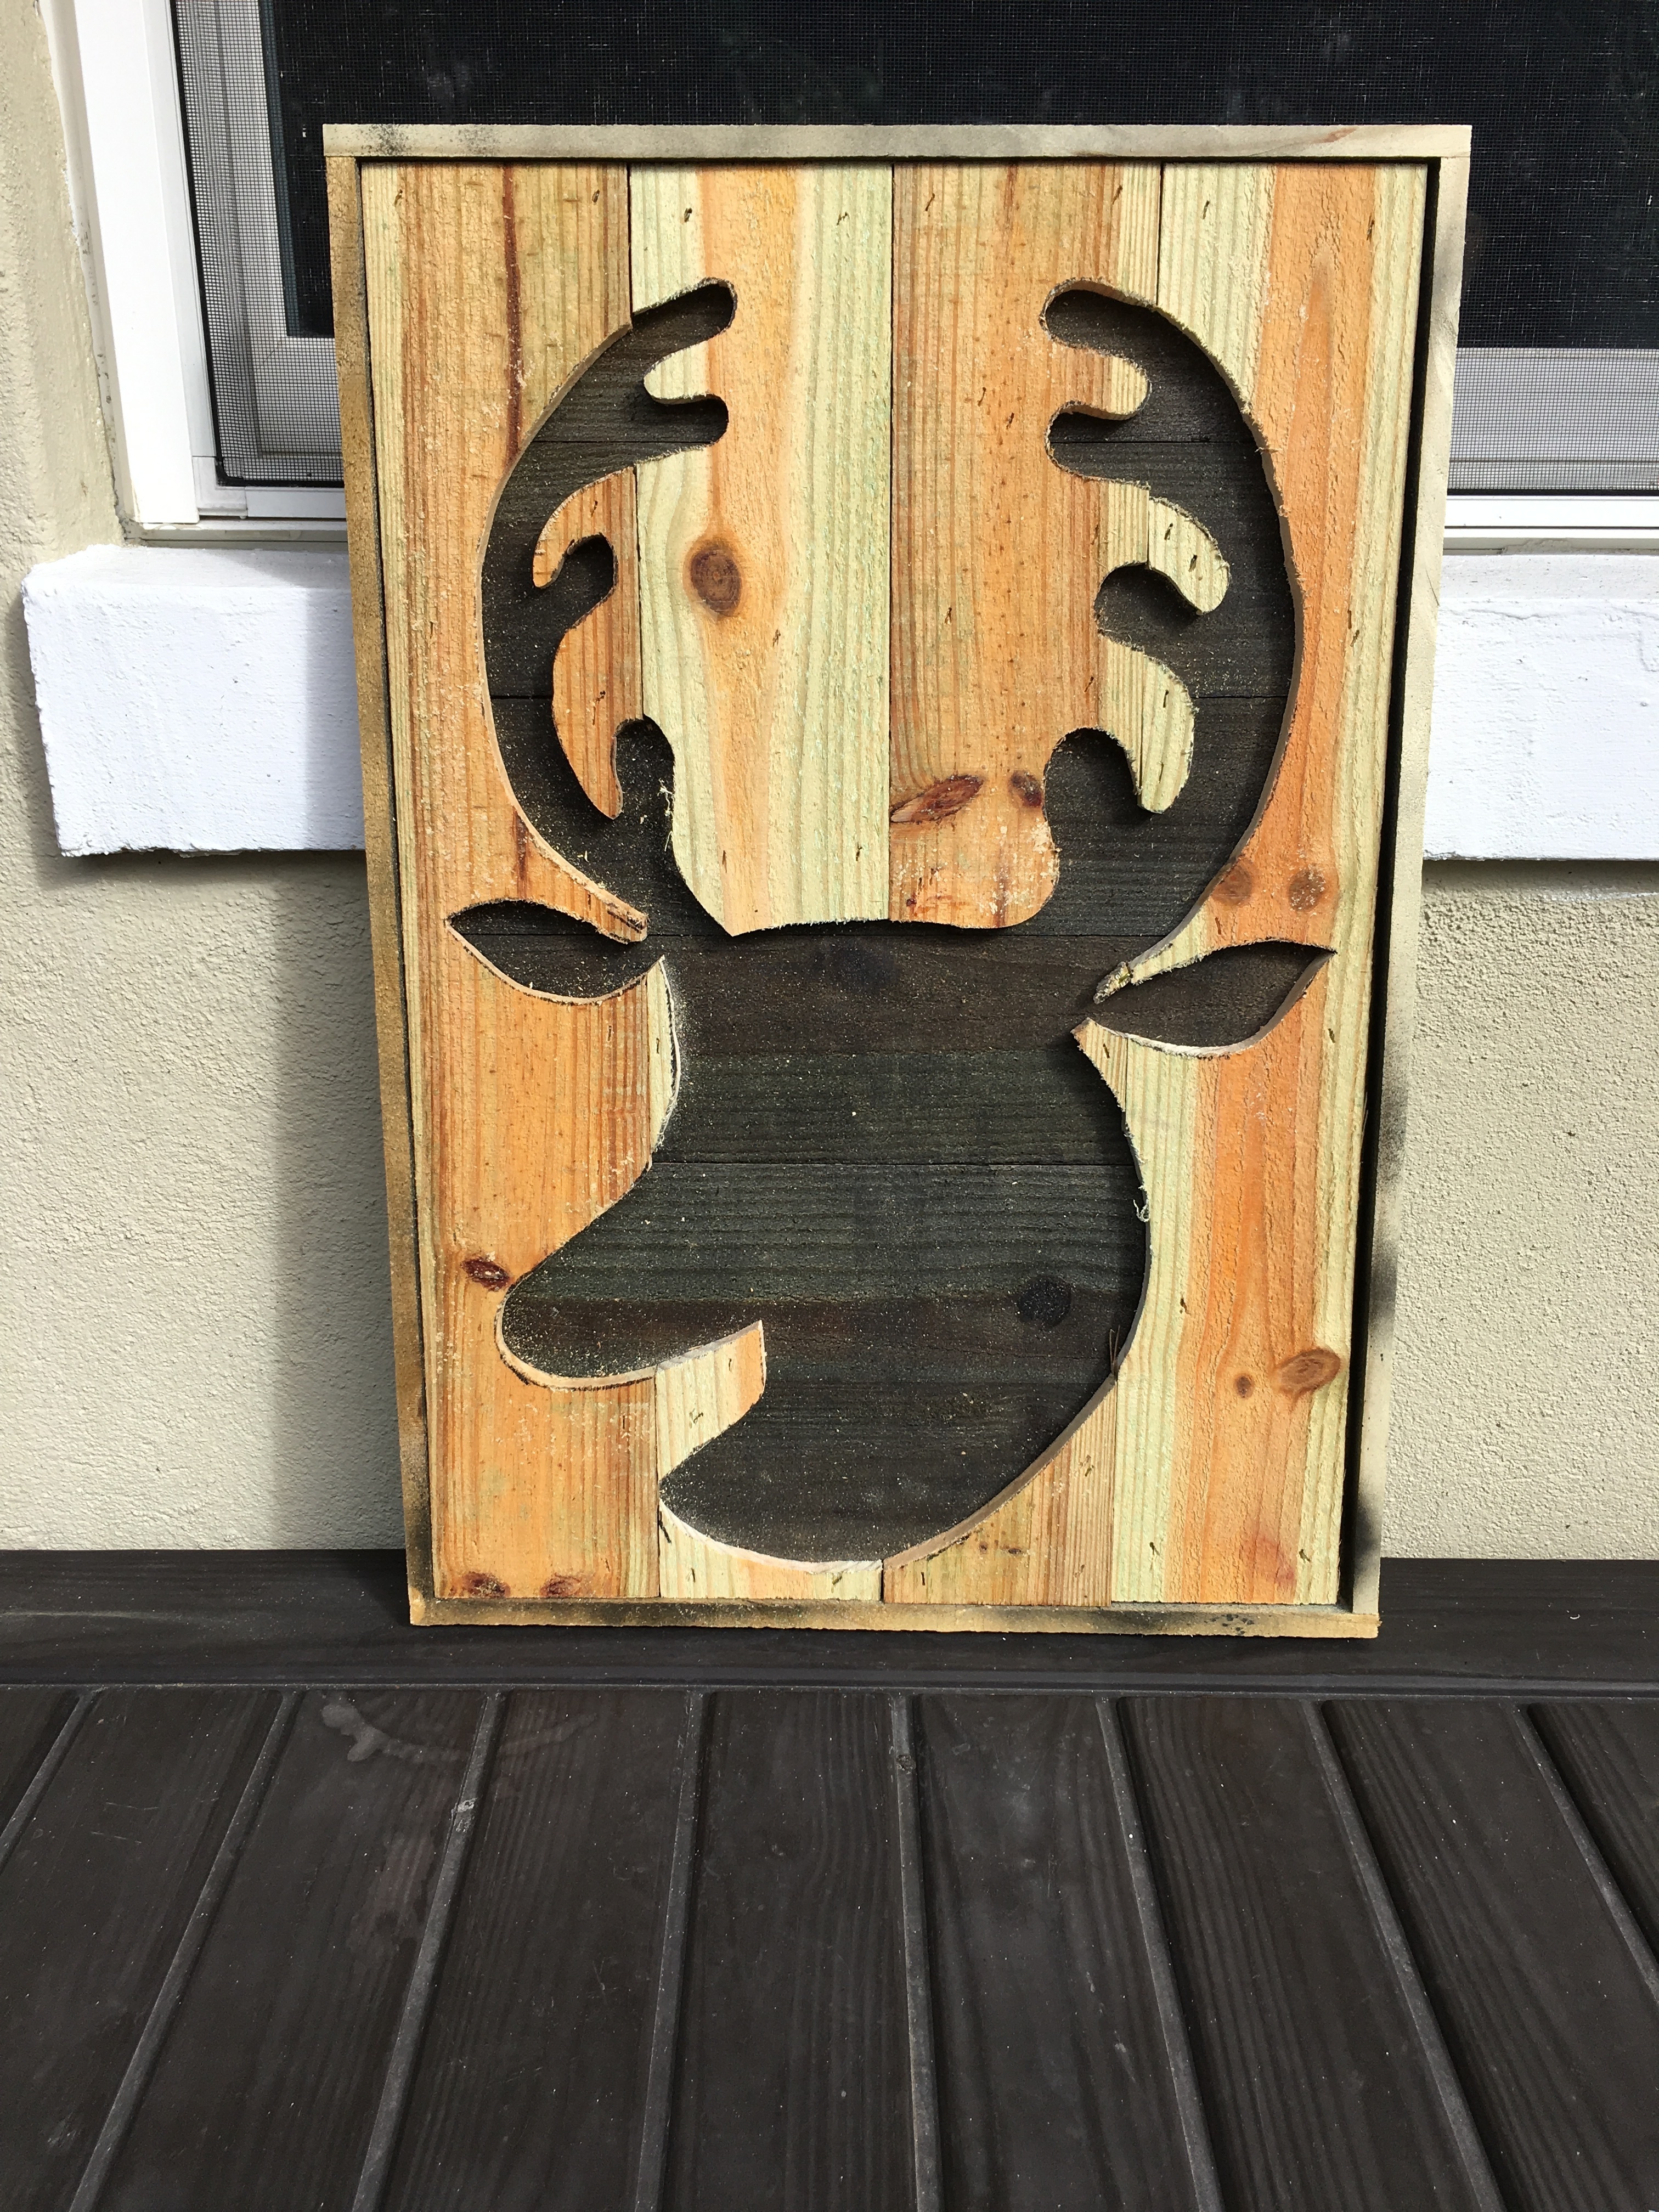 Yard decorations you can make for under $4.00 - RYOBI Nation Projects